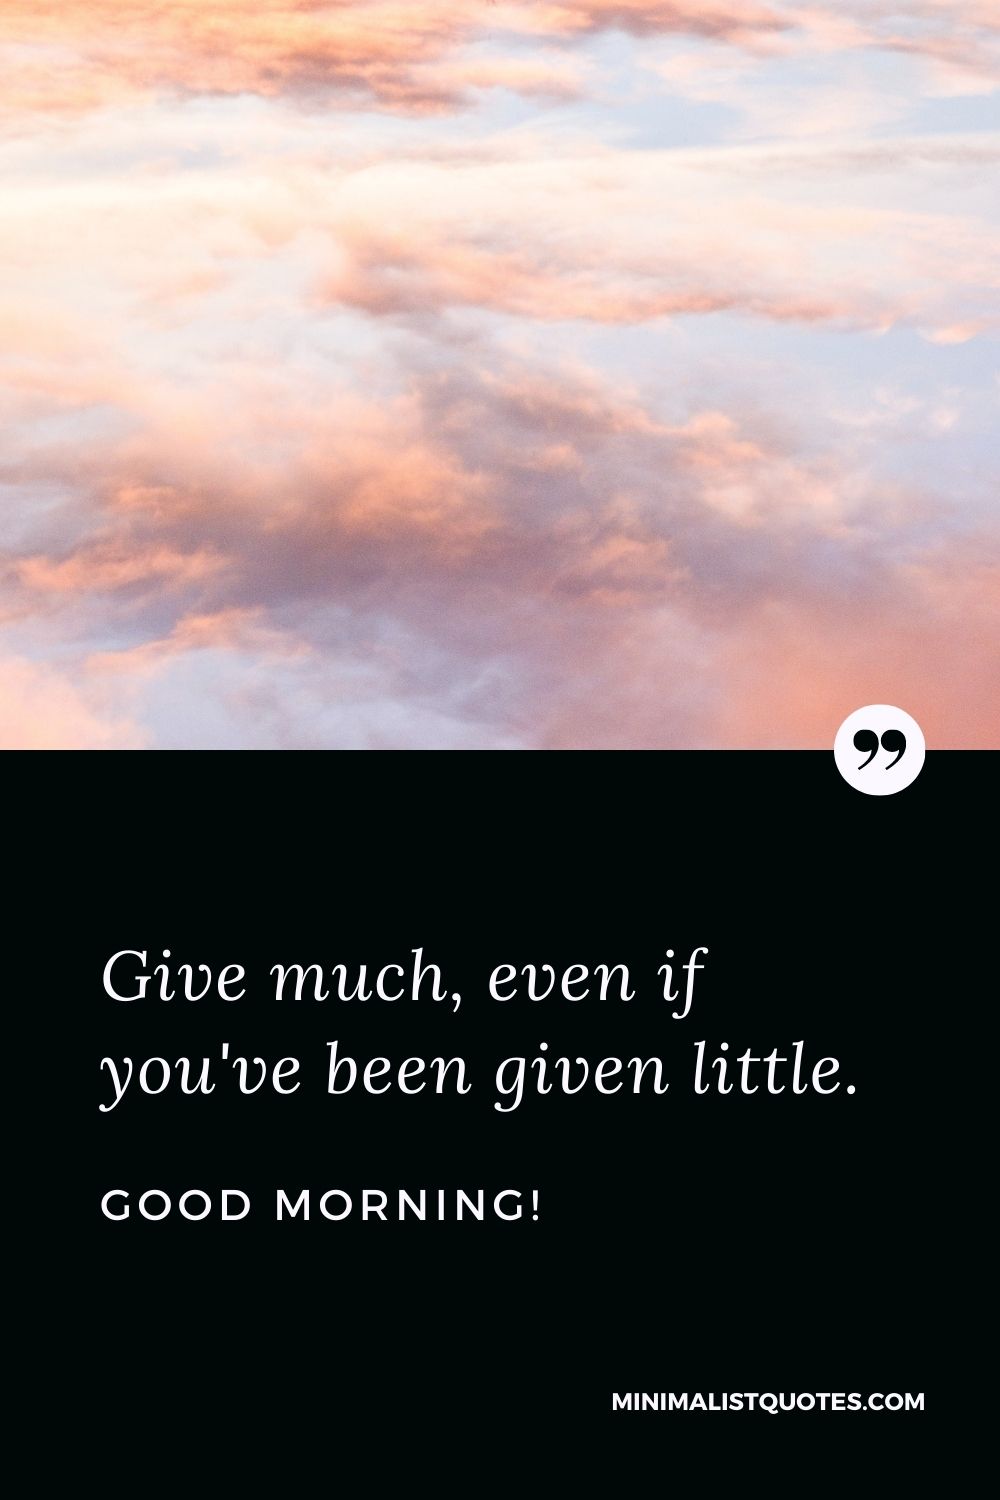 Good Morning wish, quote & message with image: Give much, even if you've been given little. Good Morning!